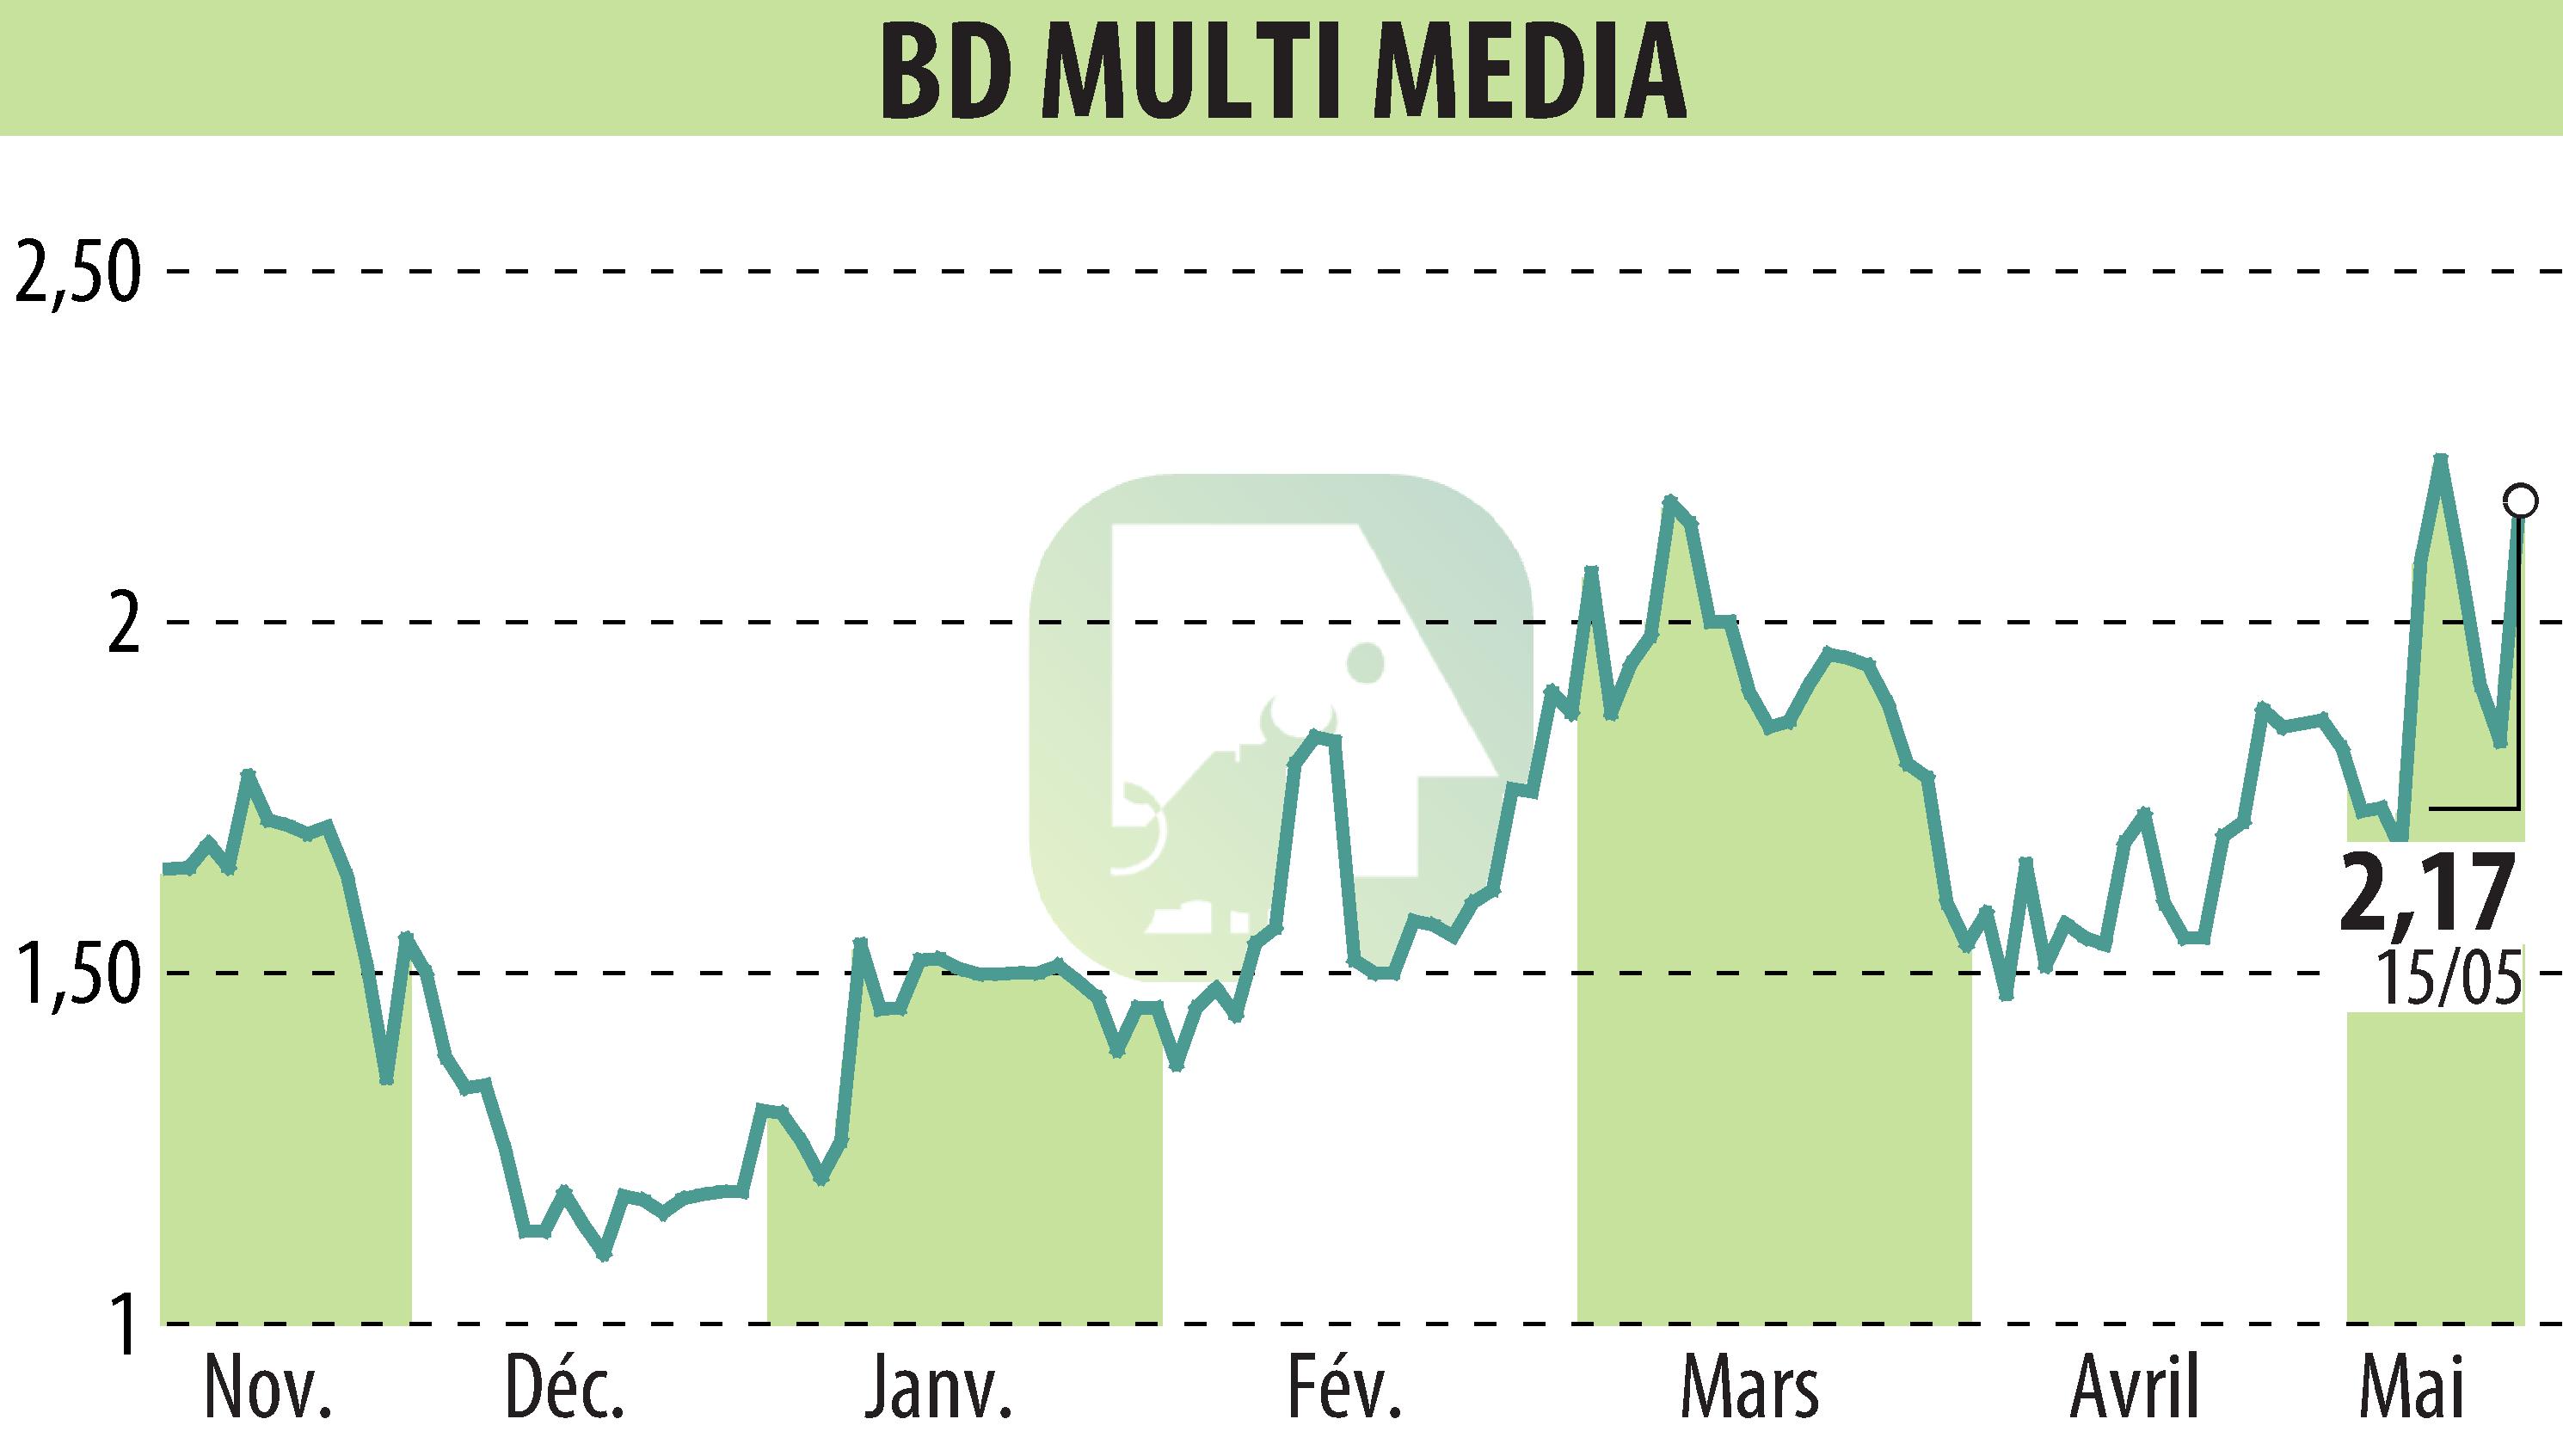 Stock price chart of BD MULTI MEDIA (EPA:ALBDM) showing fluctuations.